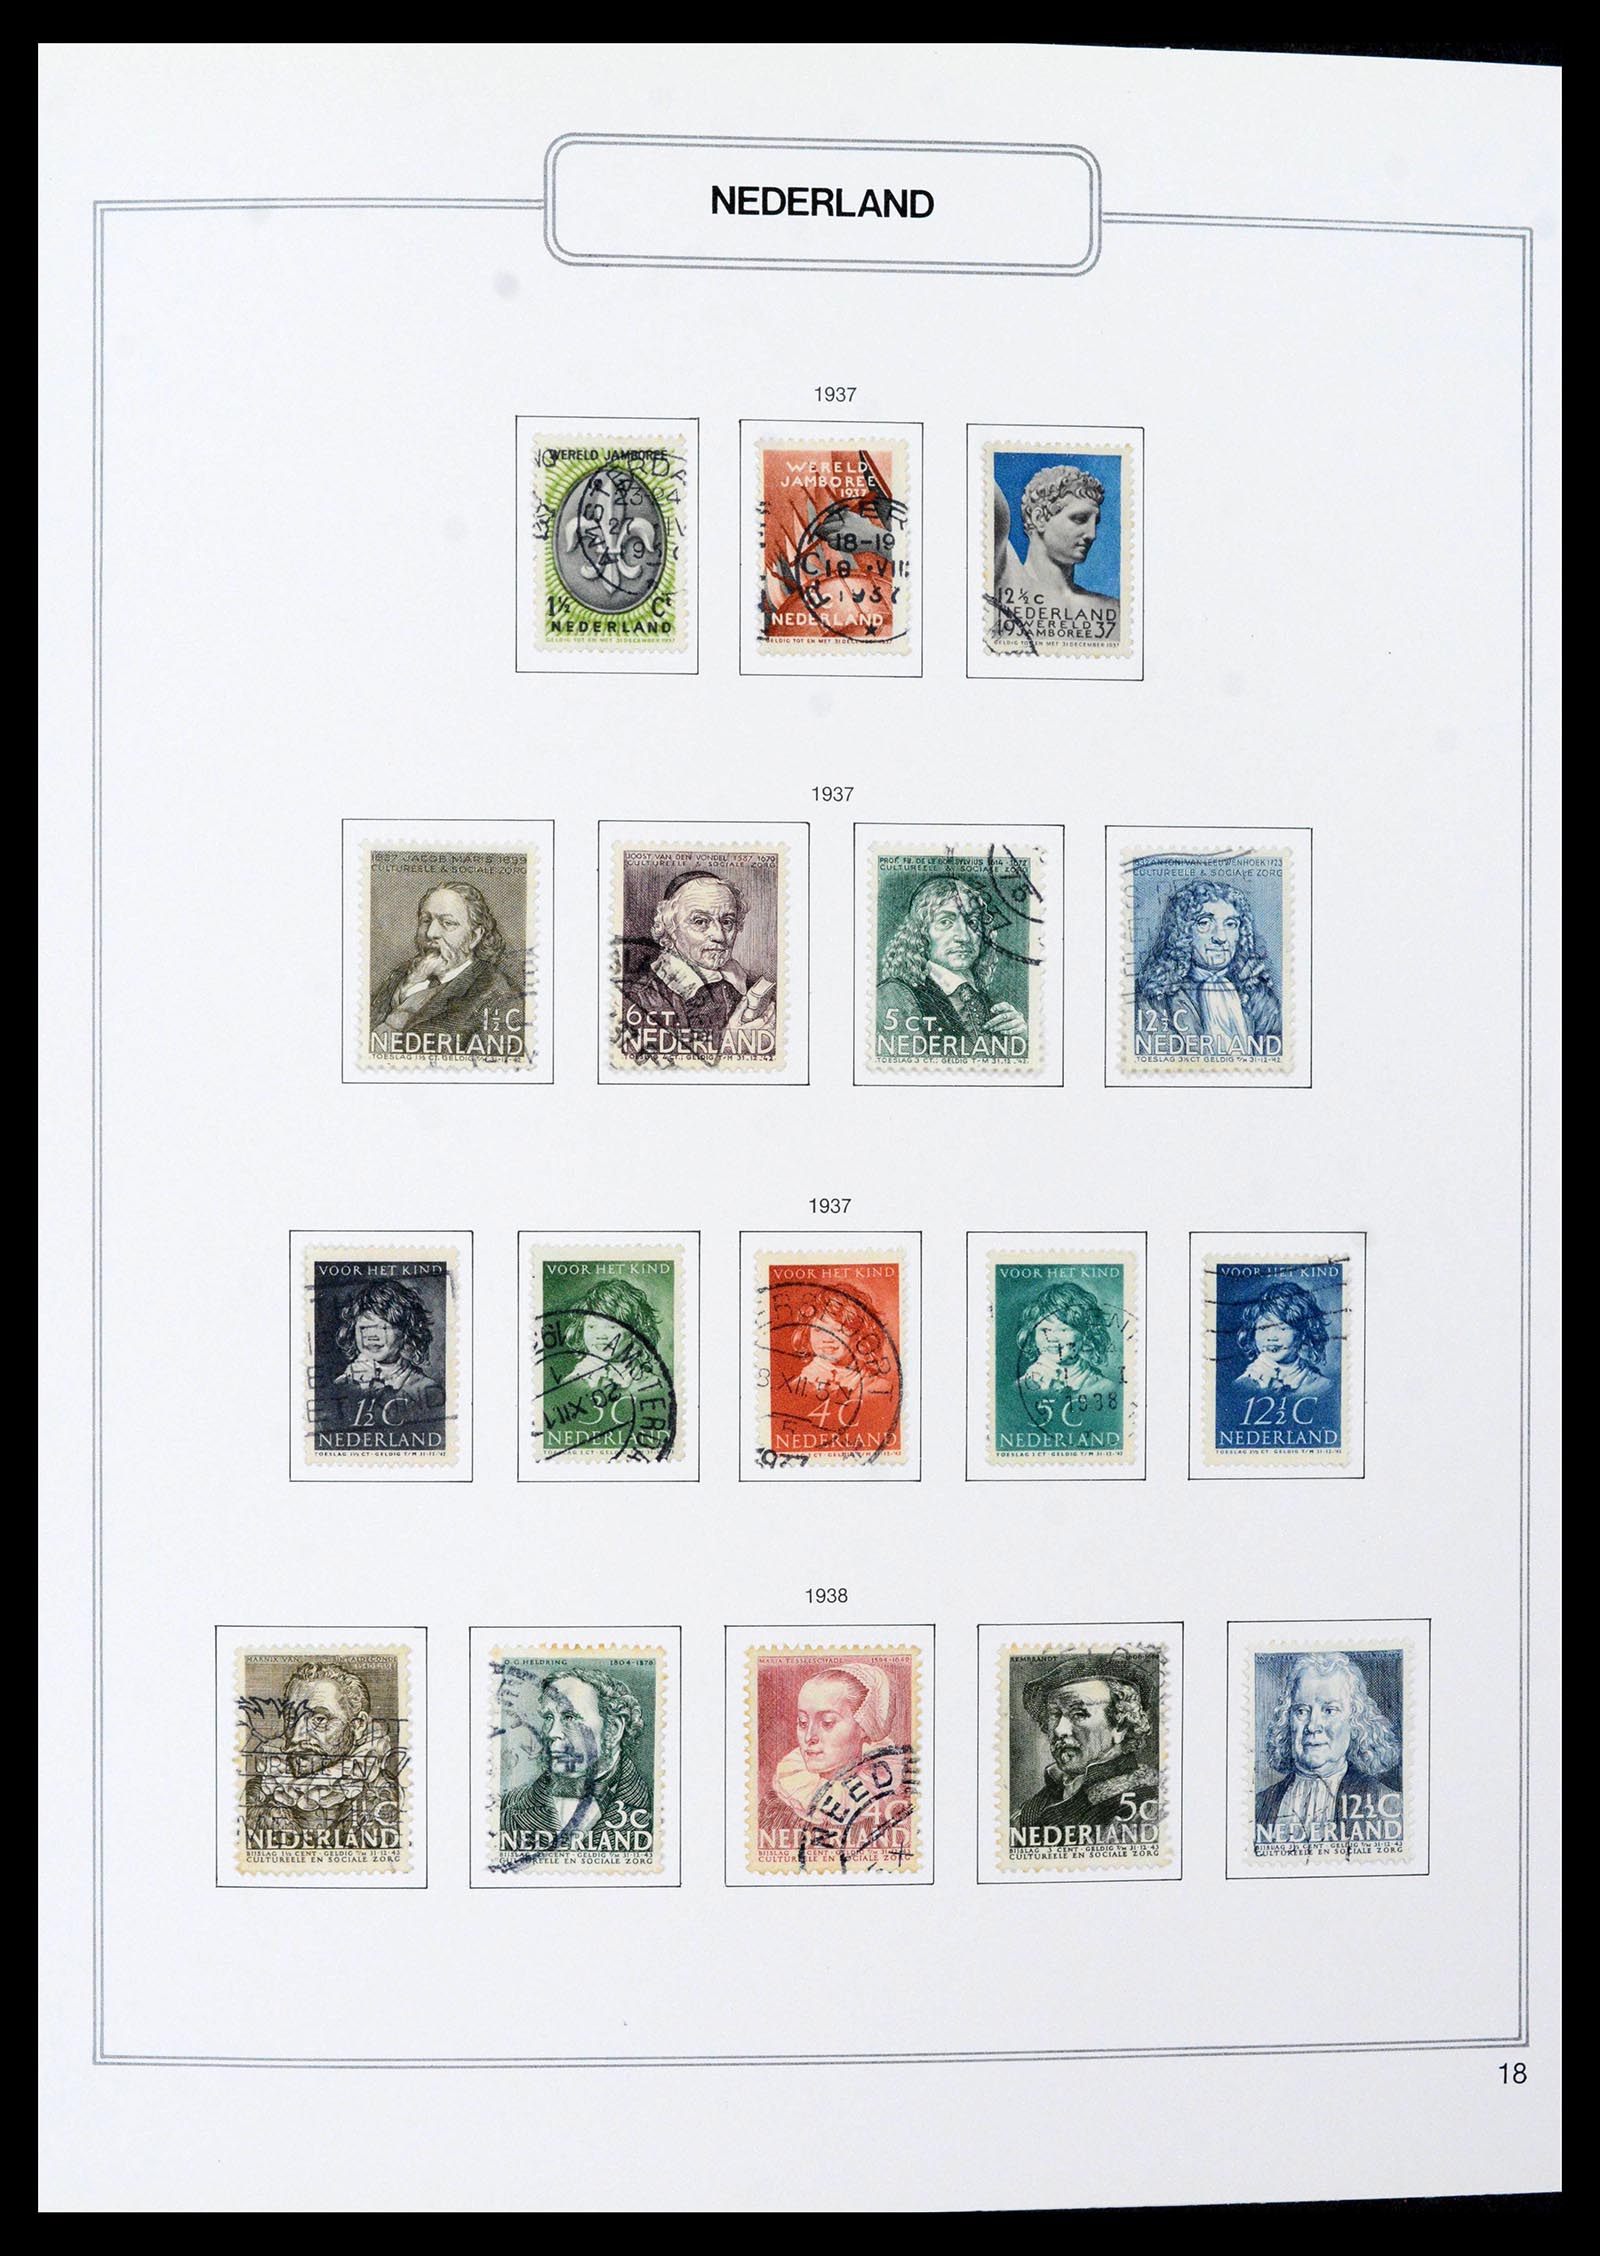 39261 0018 - Stamp collection 39261 Netherlands 1852-2015.